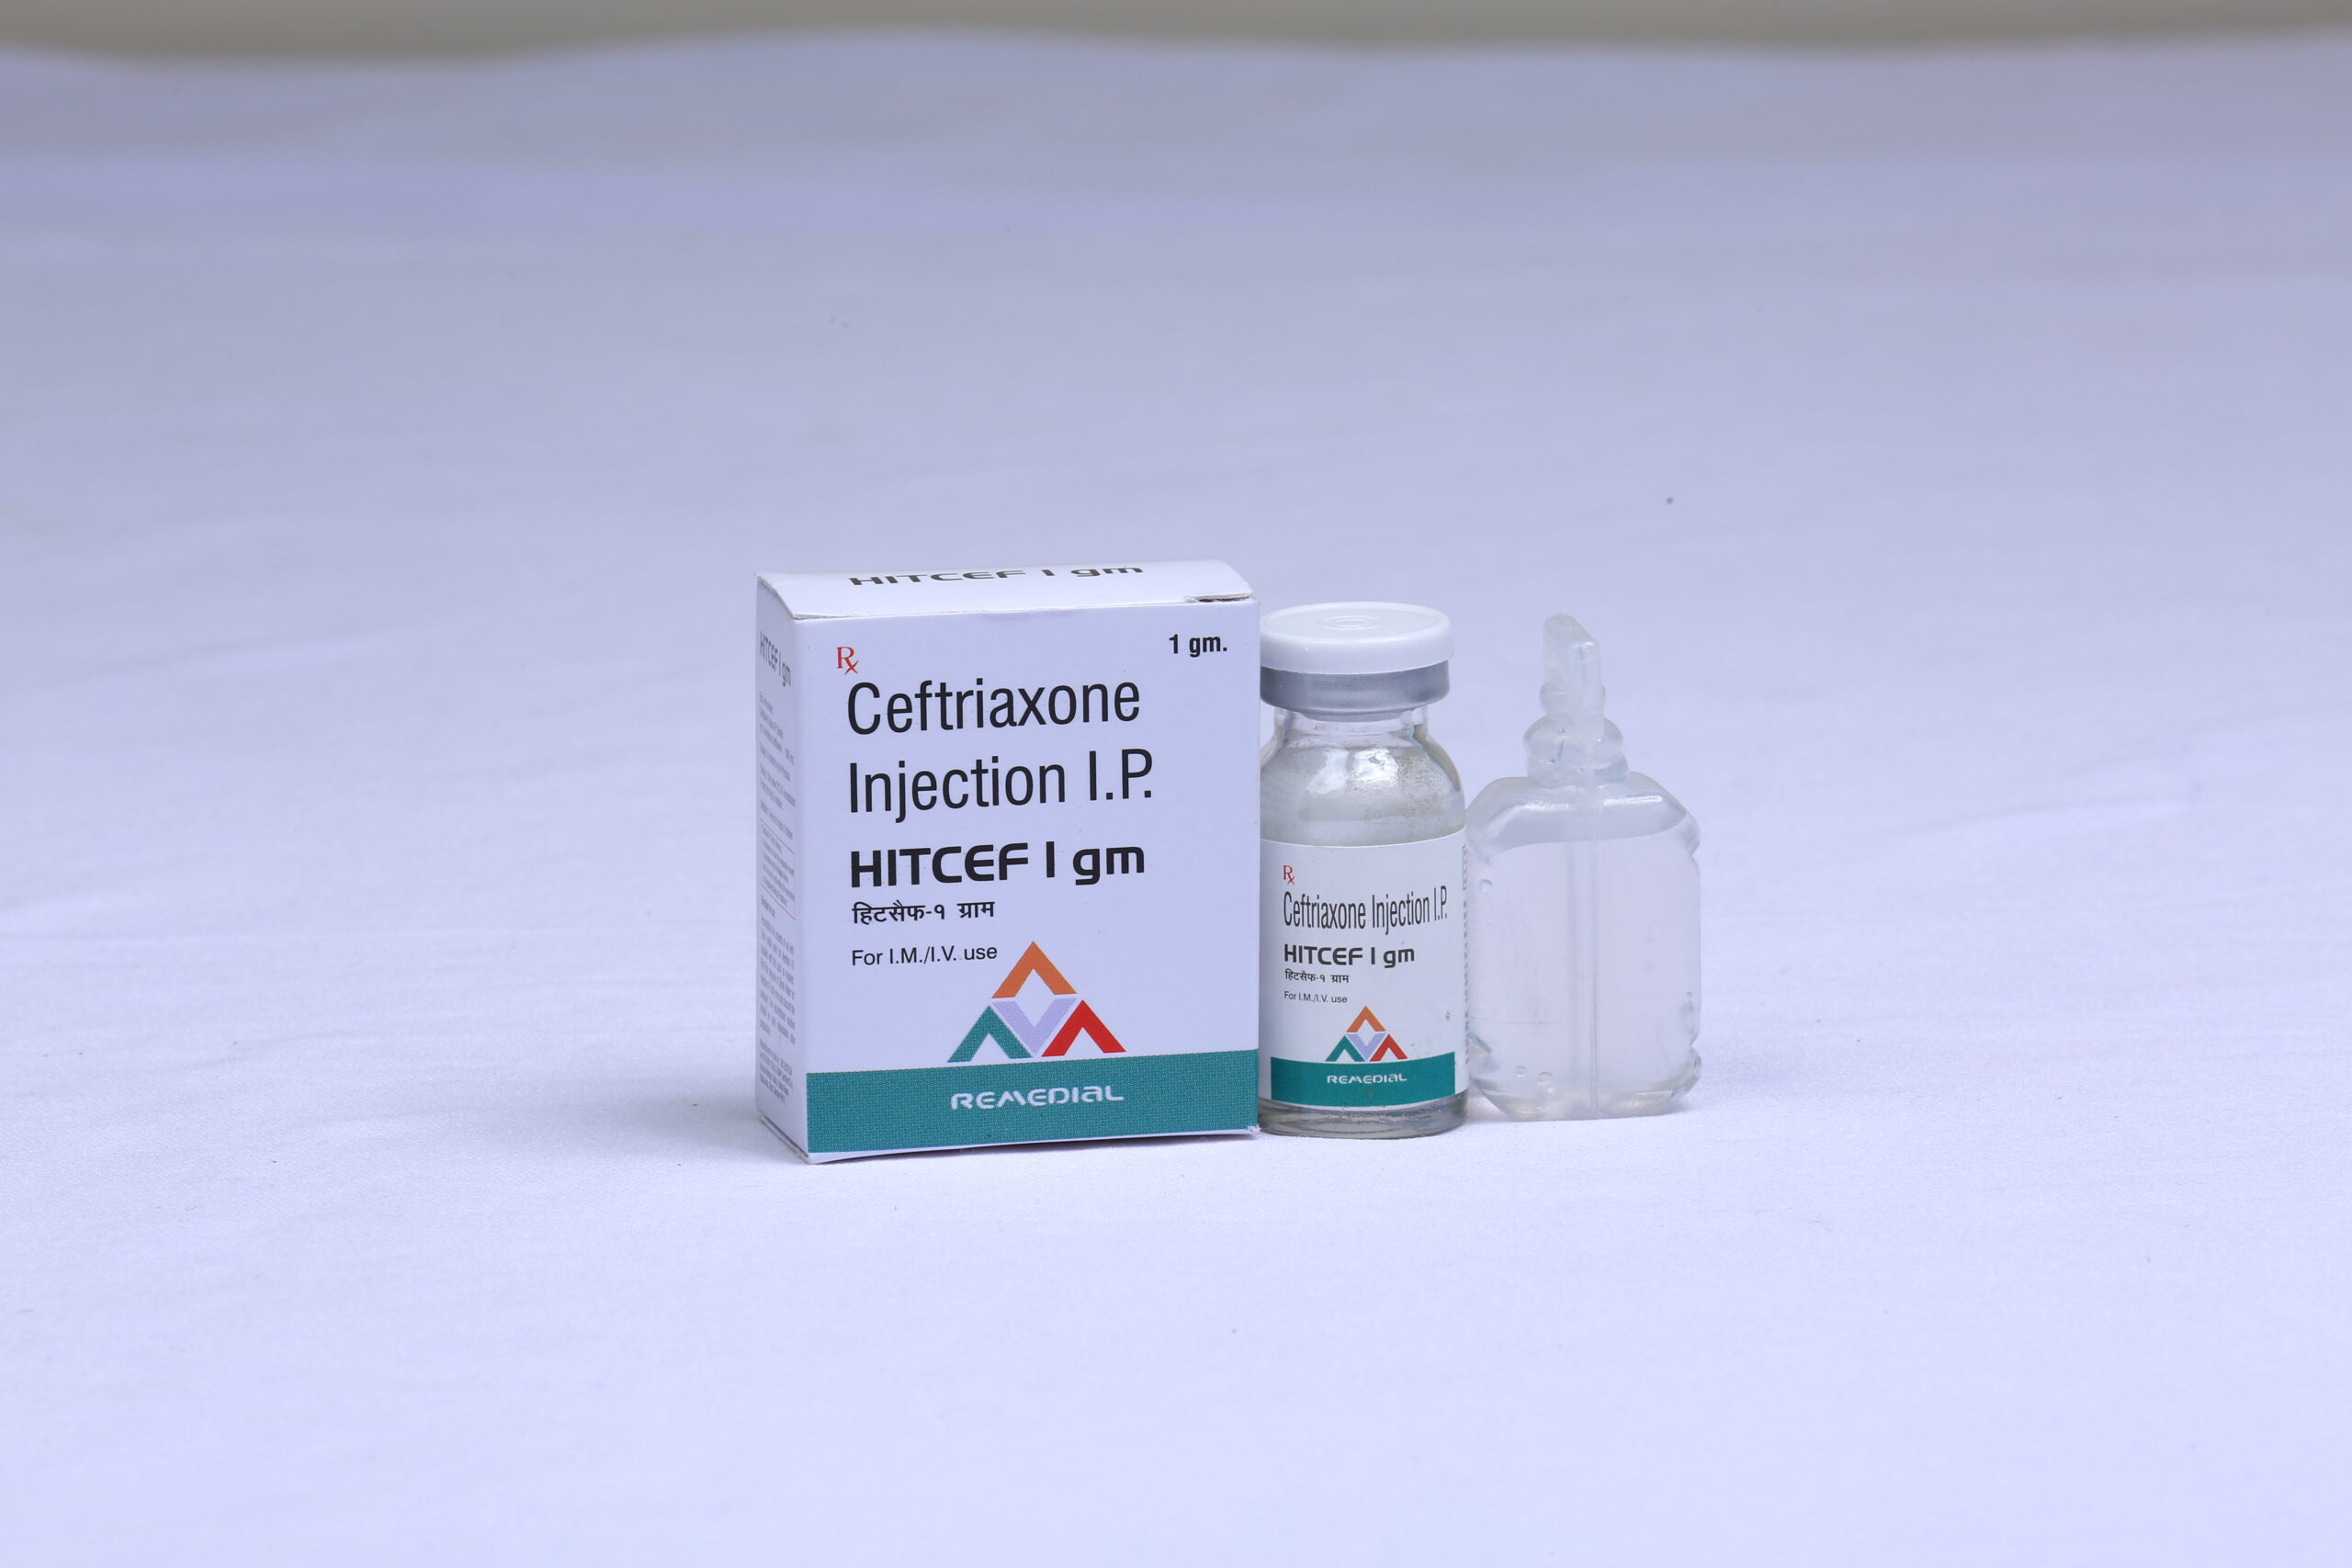 HITCEF 1gm (Ceftriaxone 1000mg Injection)